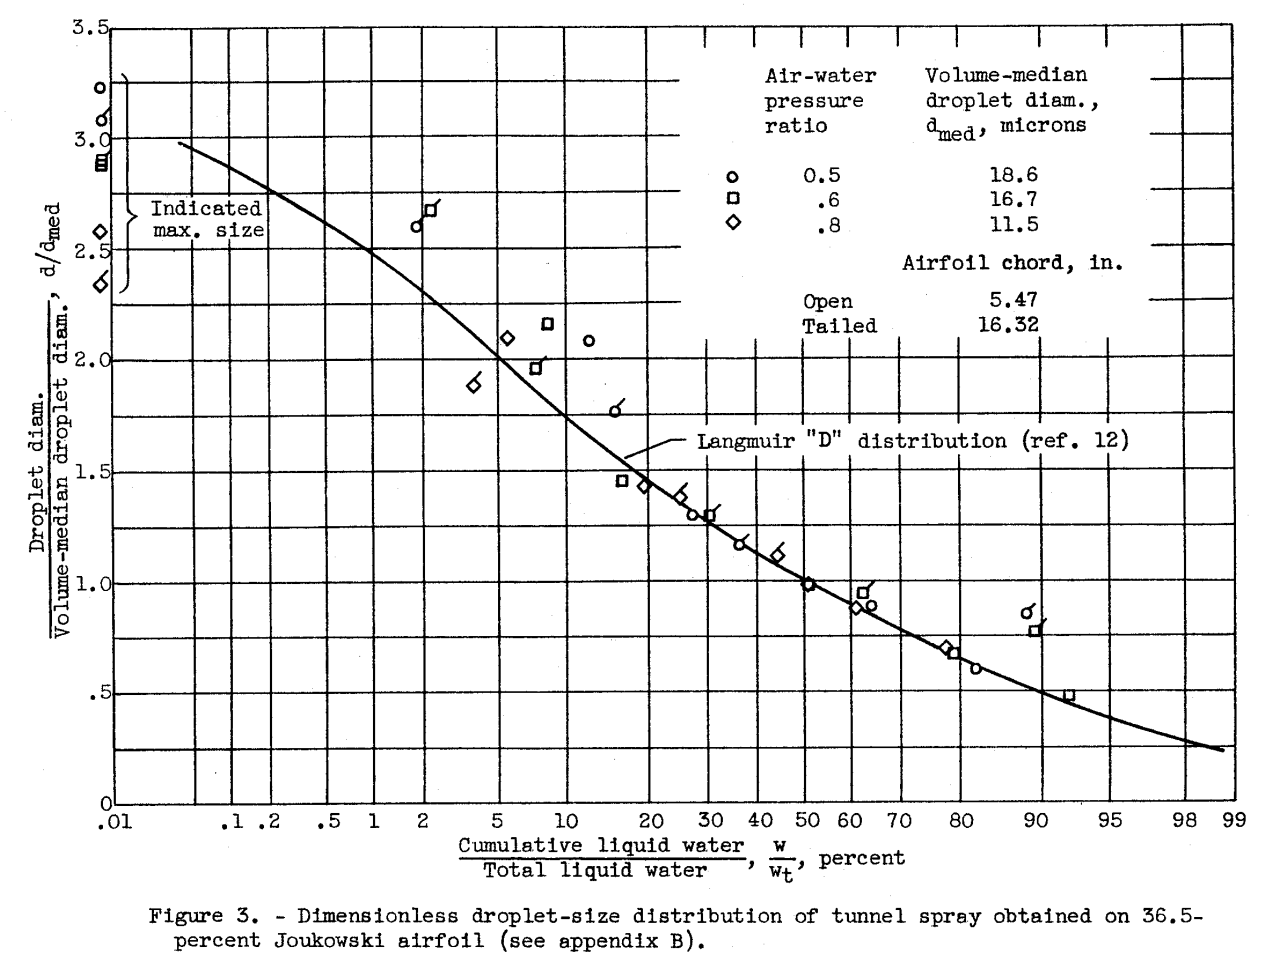 Figure 3. Dimensionless droplet-size distribution of tunnel spray obtained on 36.5-percent Joukowski airfoil (see appendix B).